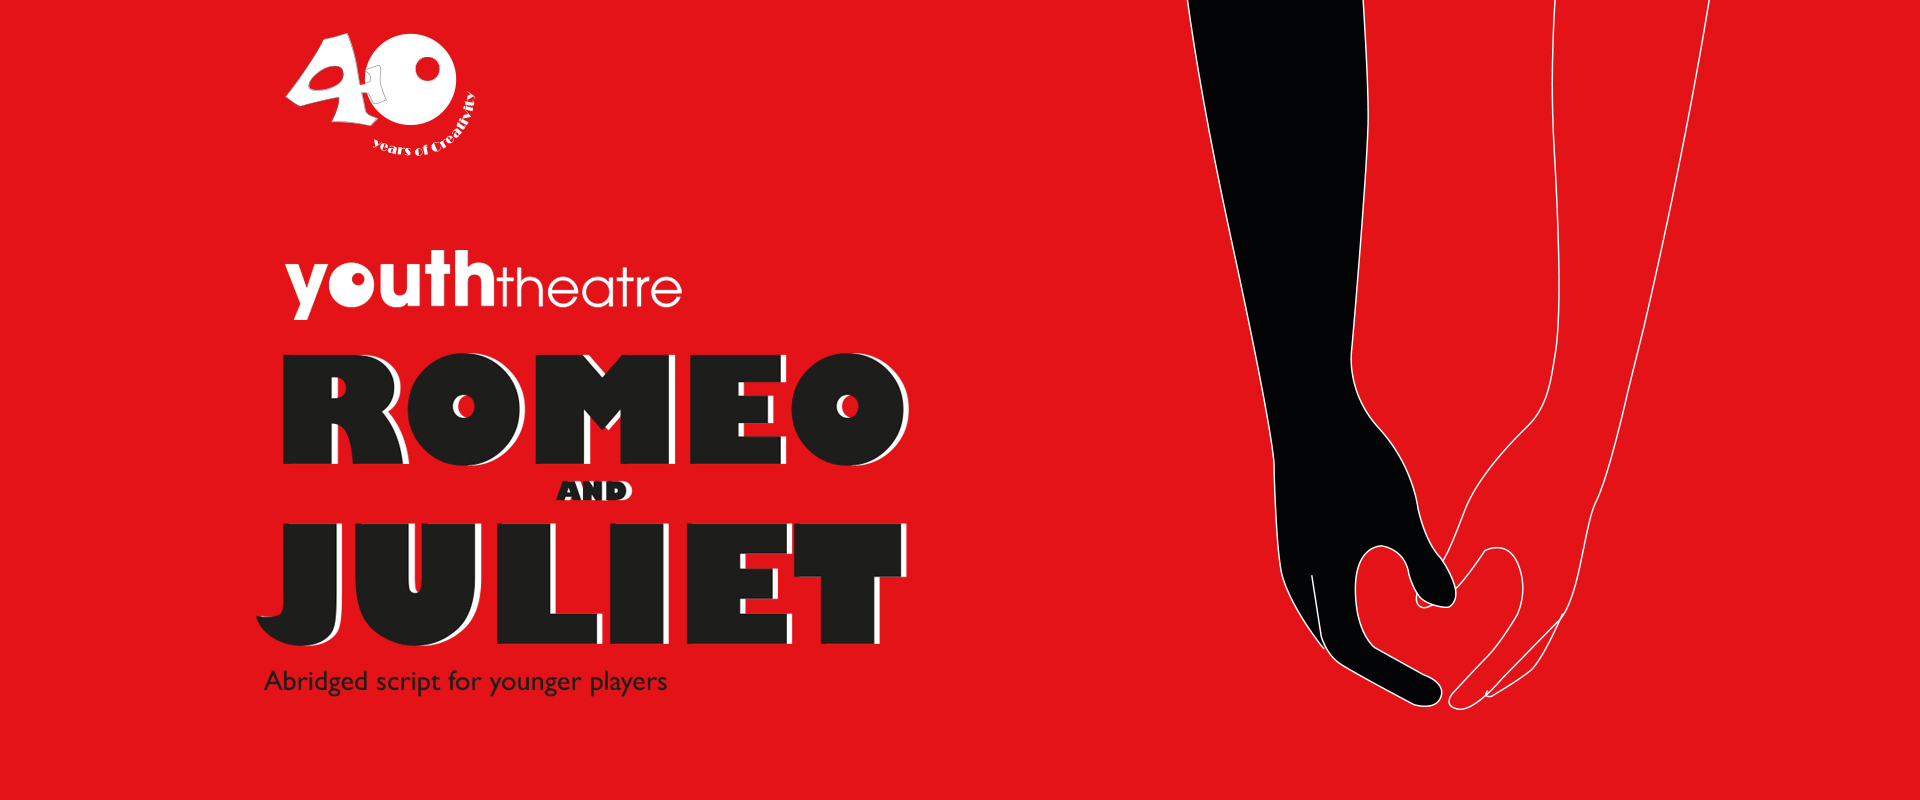 https://www.gatehousetheatre.co.uk/whatson-event/romeo-and-juliet-youth-theatre/